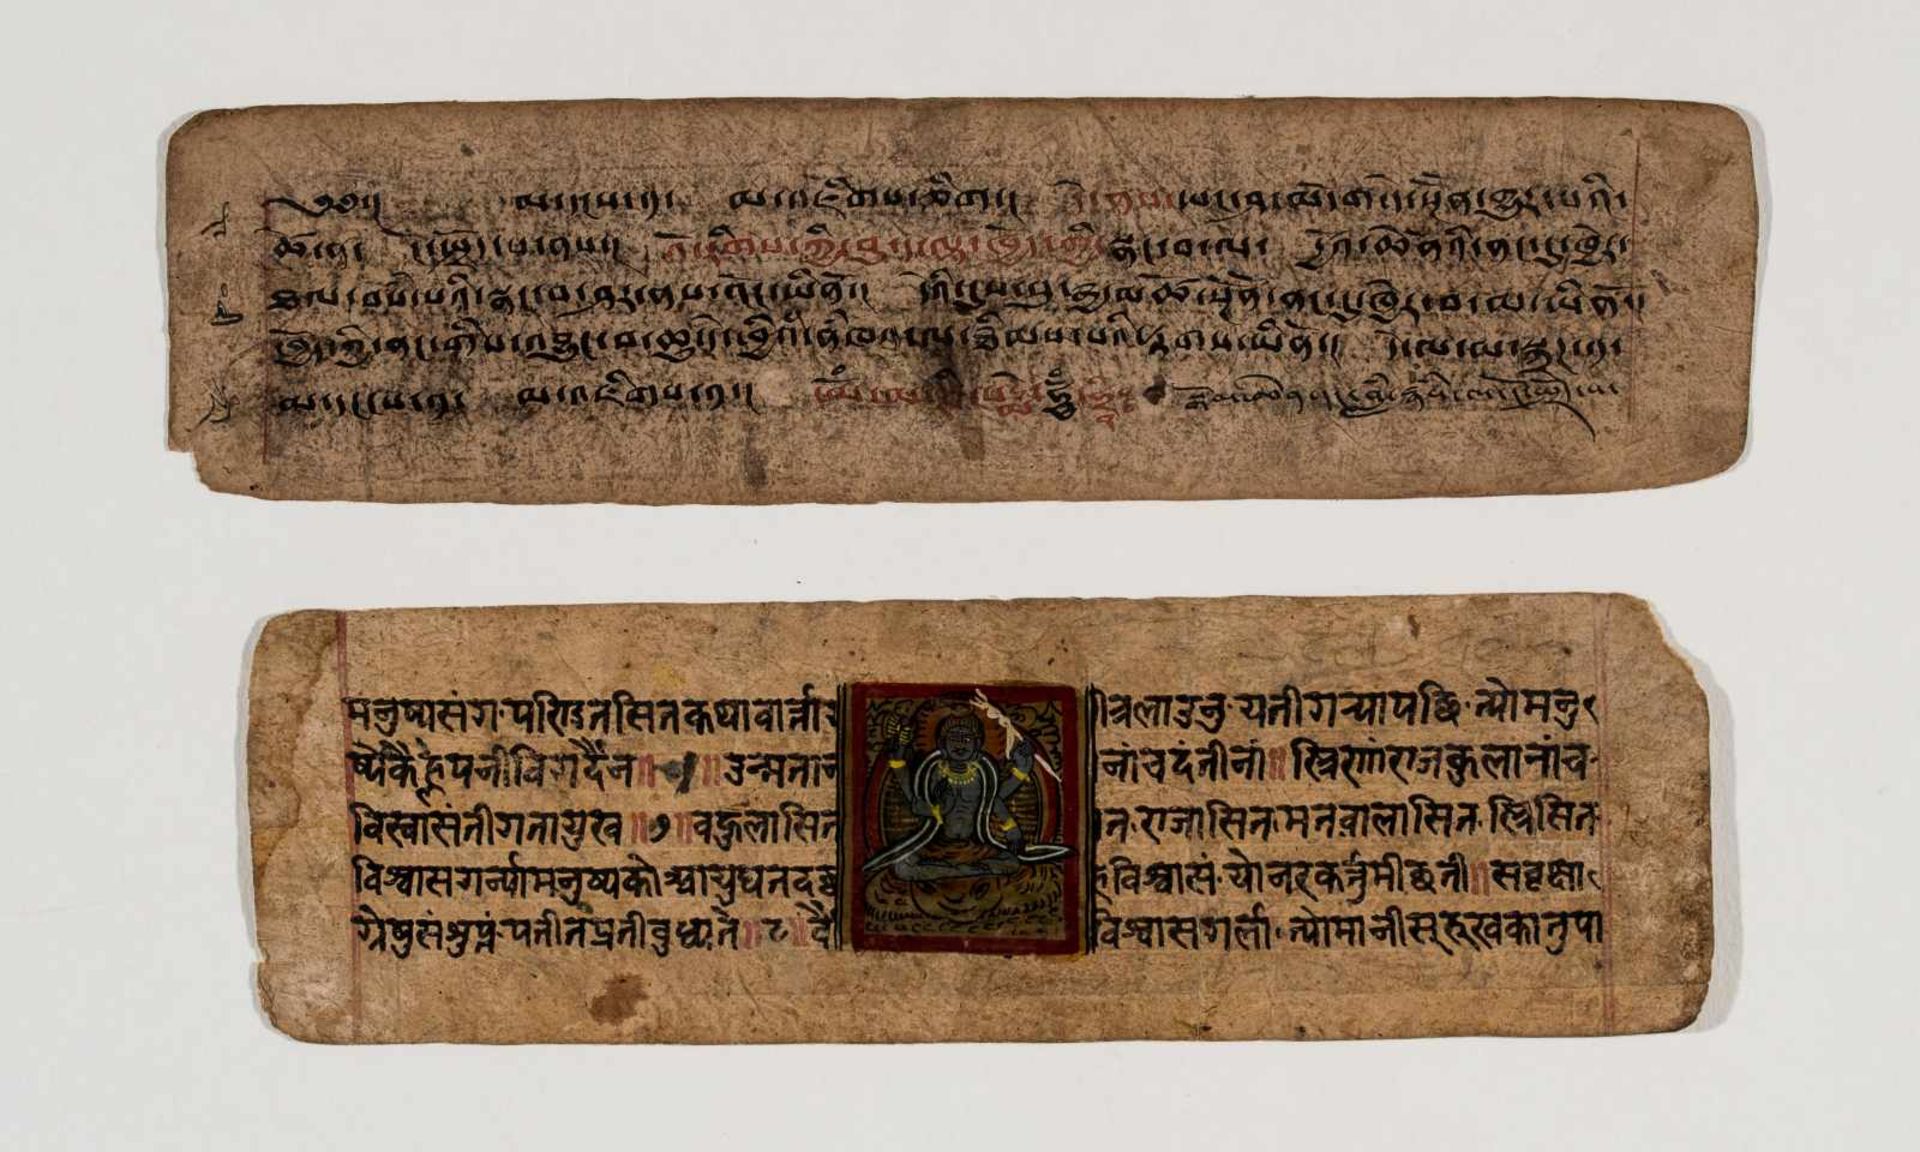 TWO MANUSCRIPTS FROM PRAYER BOOKS, NEPAL 19TH CENTURYInk and colors on paperNepal, 19th centuryTwo